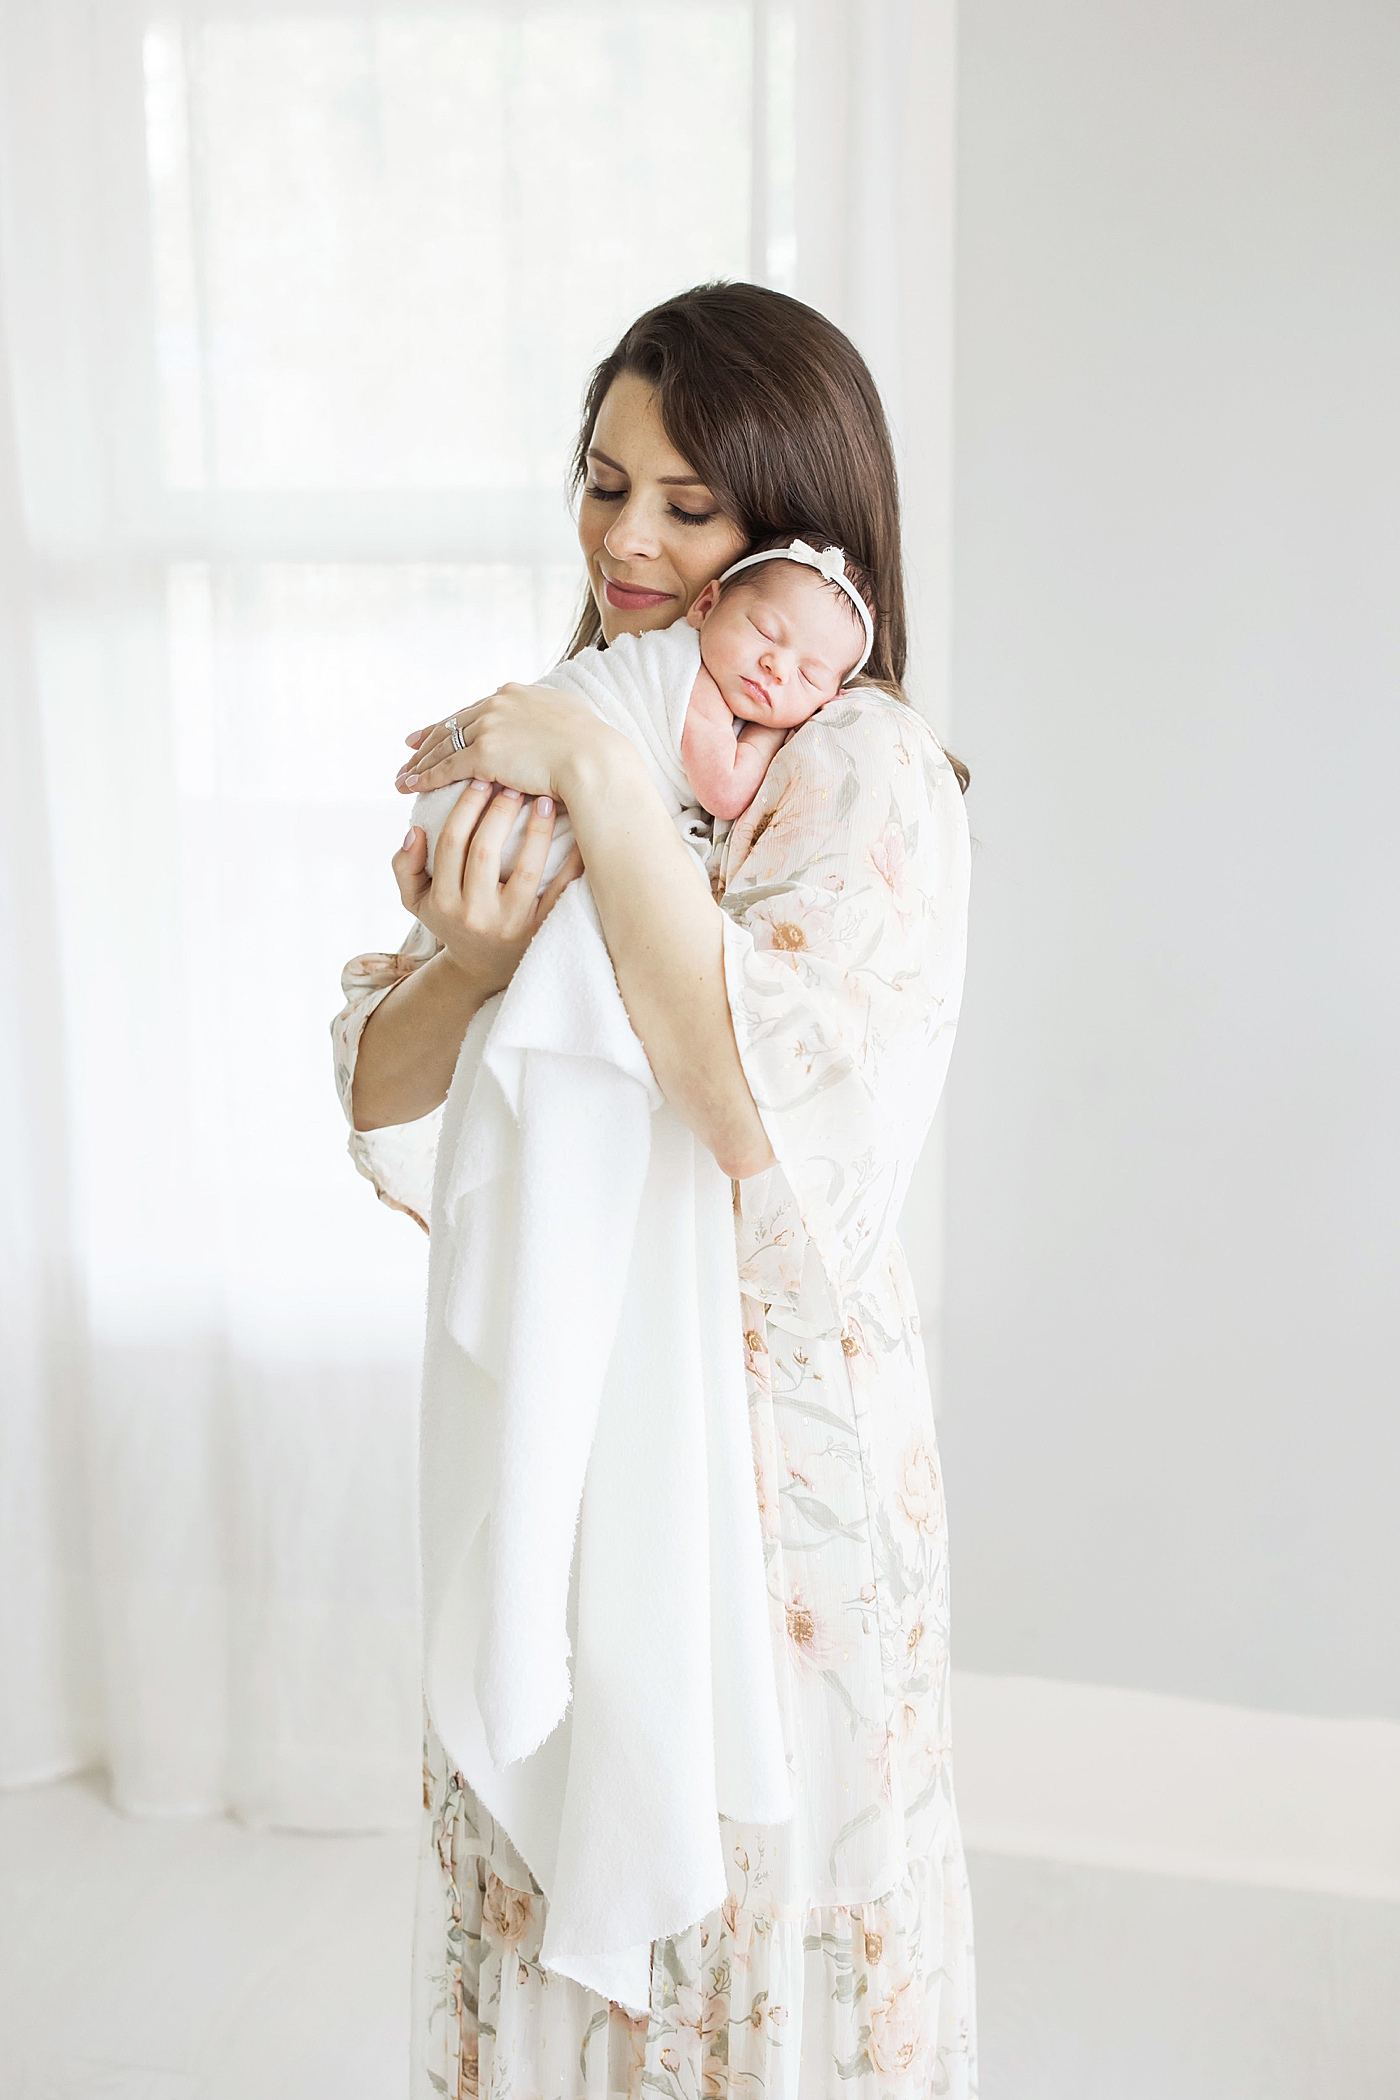 Mom holding her newborn baby girl on her shoulder. Photo by Fresh Light Photography.